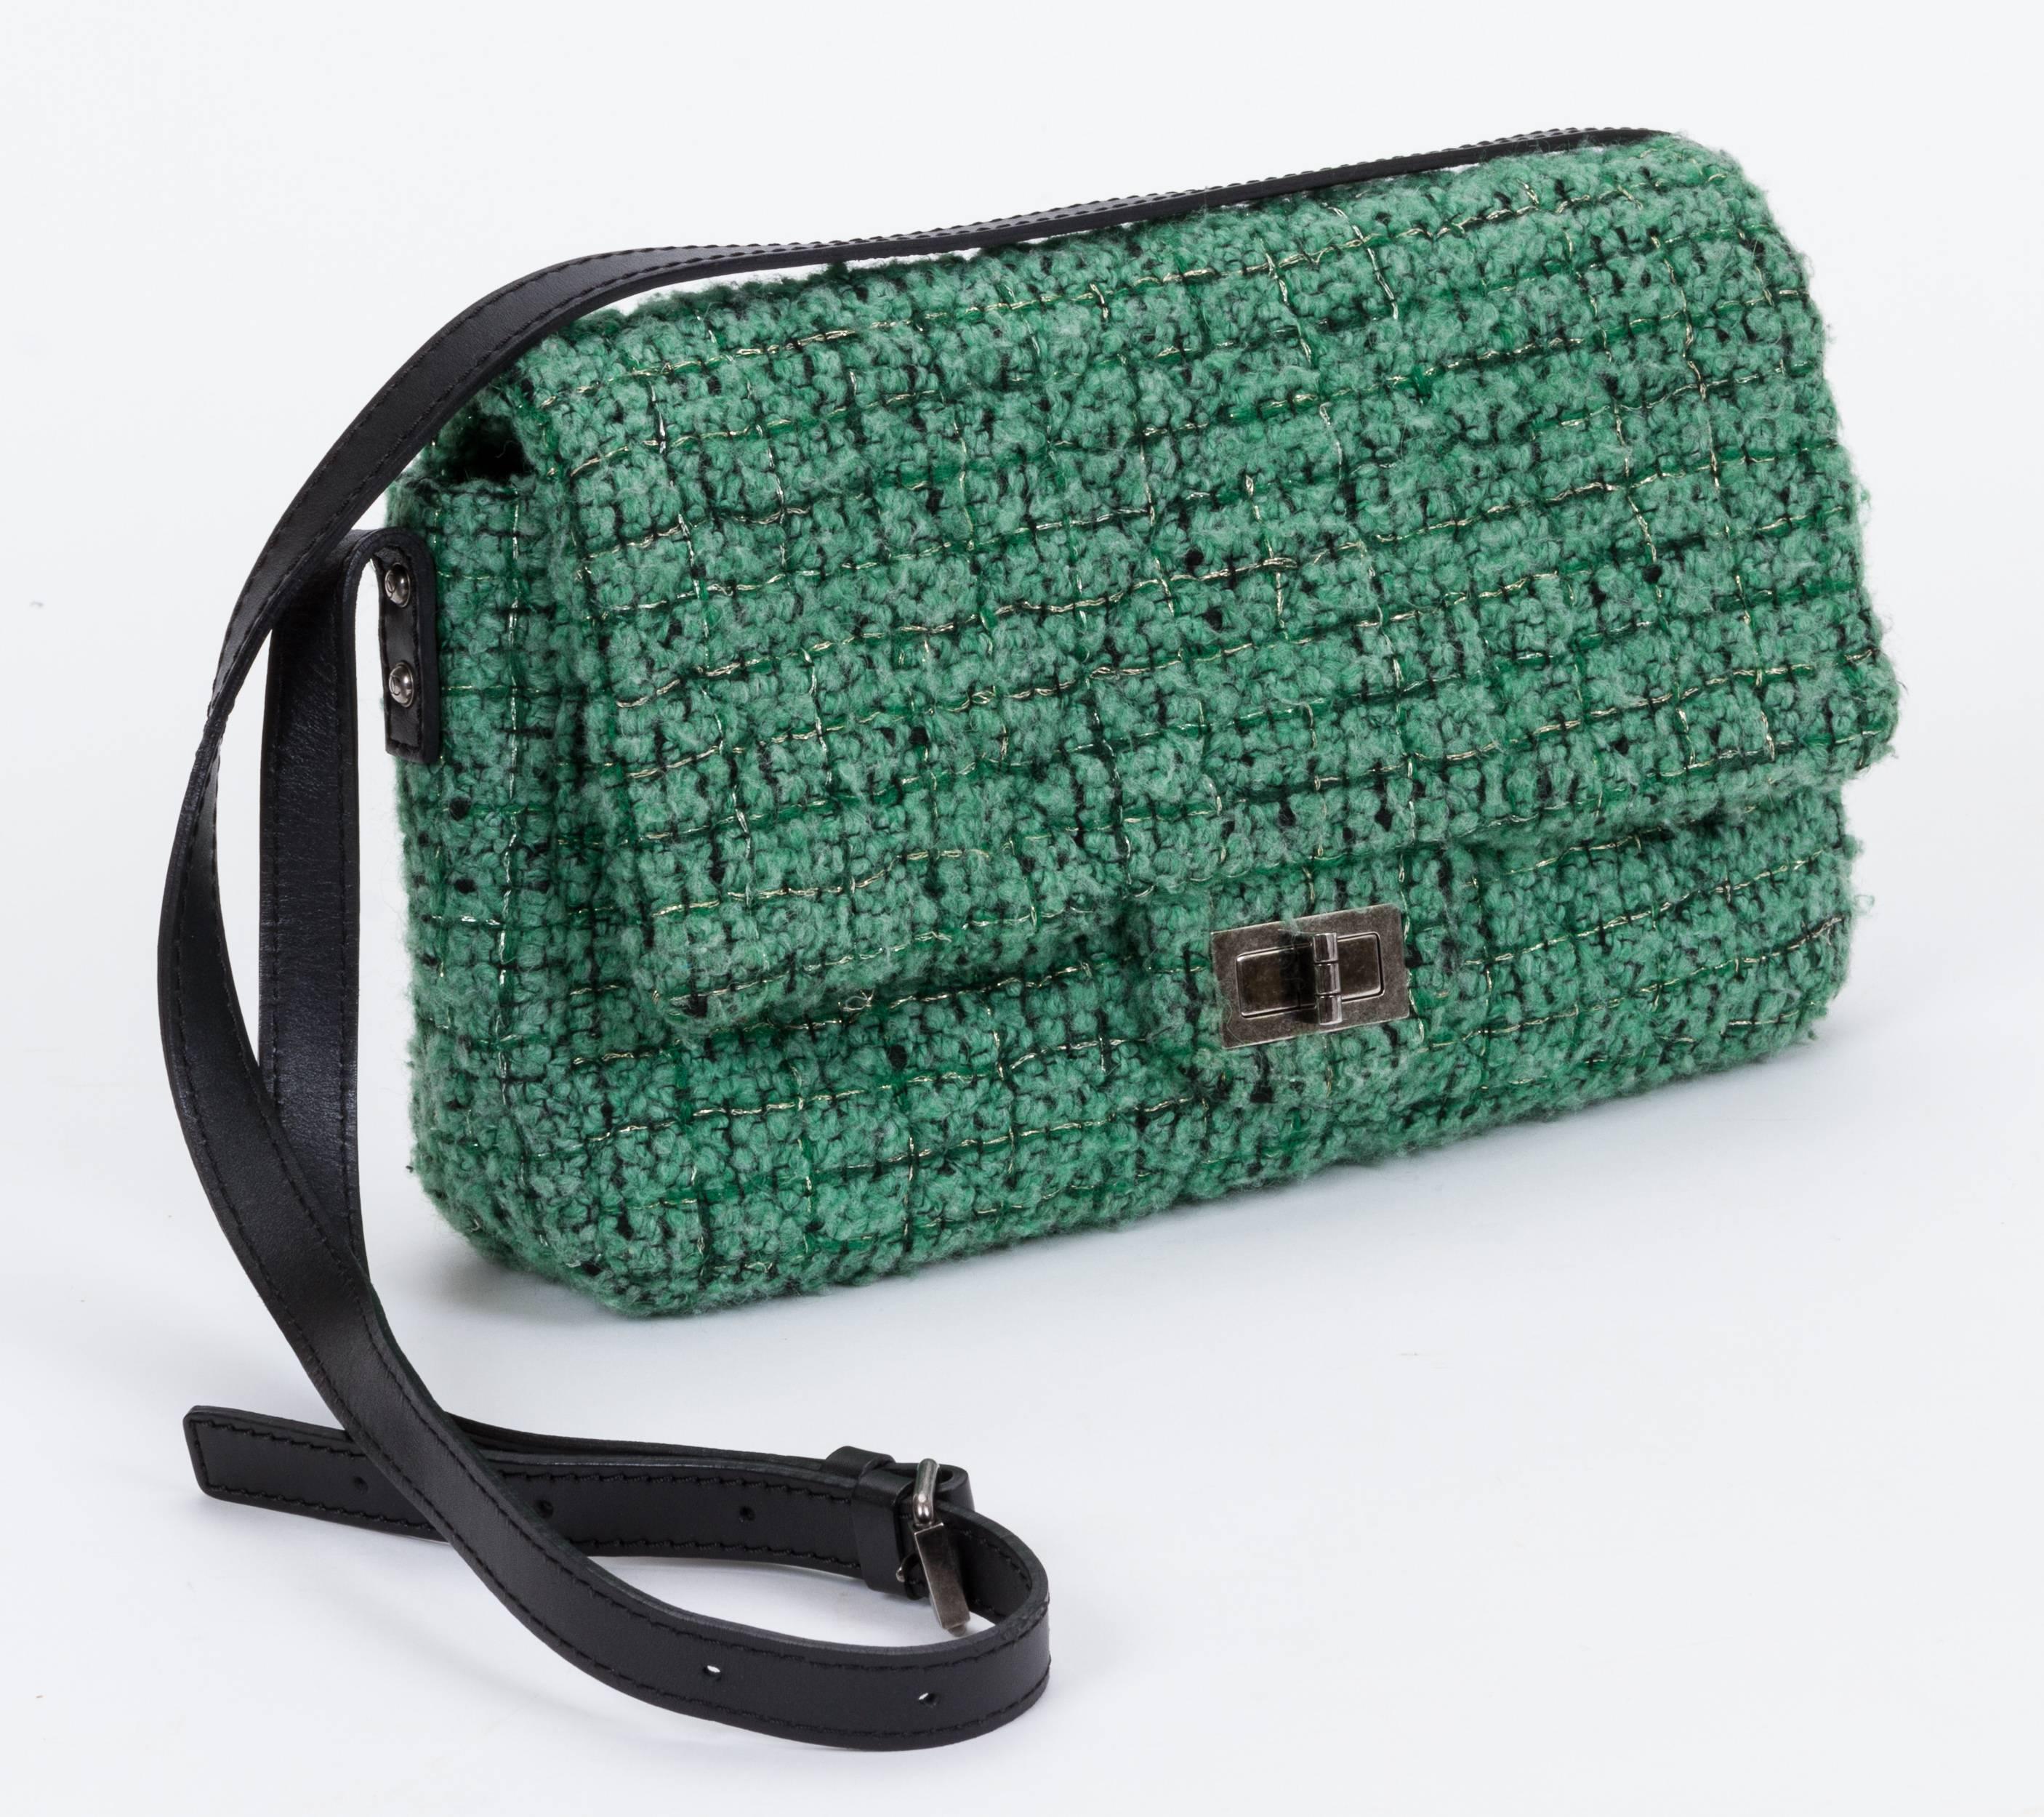 Chanel cross-body single-flap bag in green tweed with black leather detail. Shoulder drop, 19